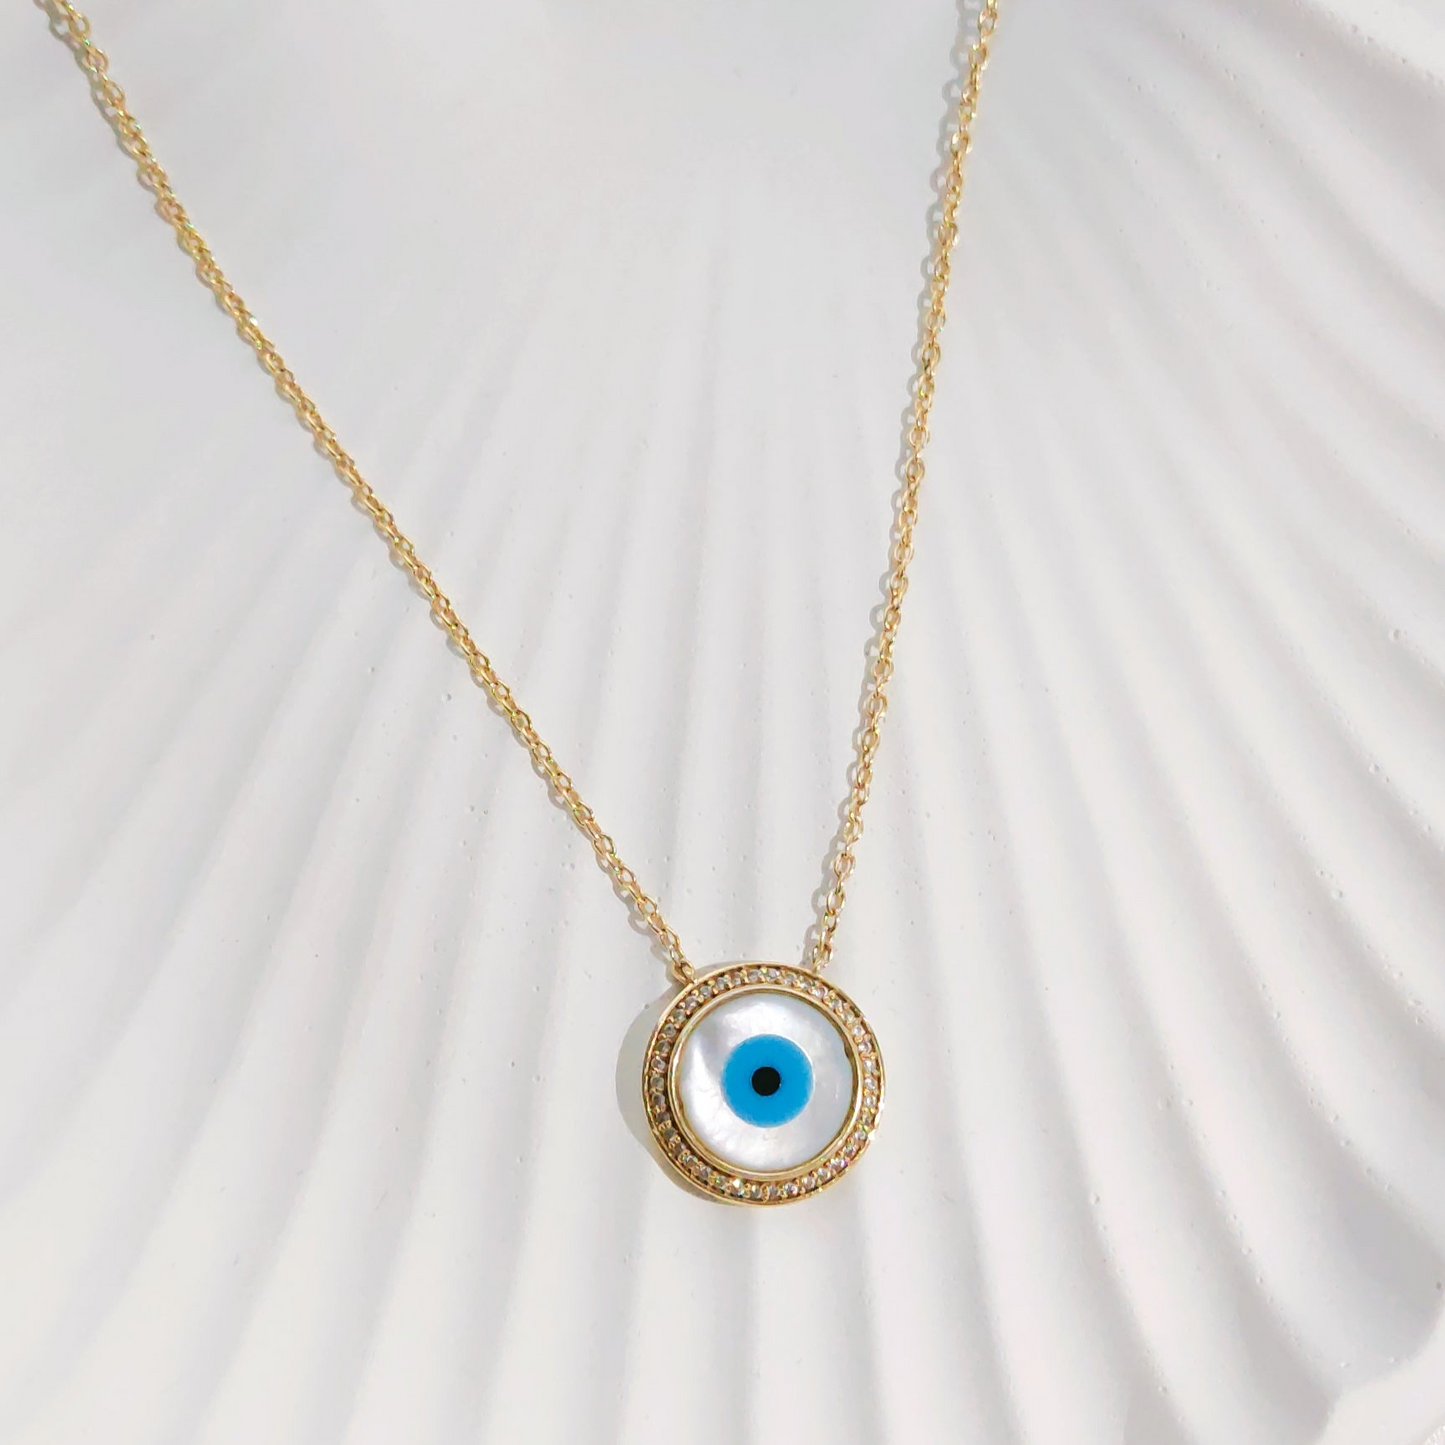 Evil Eye Neclace with Zircon Bling in Gold Plated 925 Silver